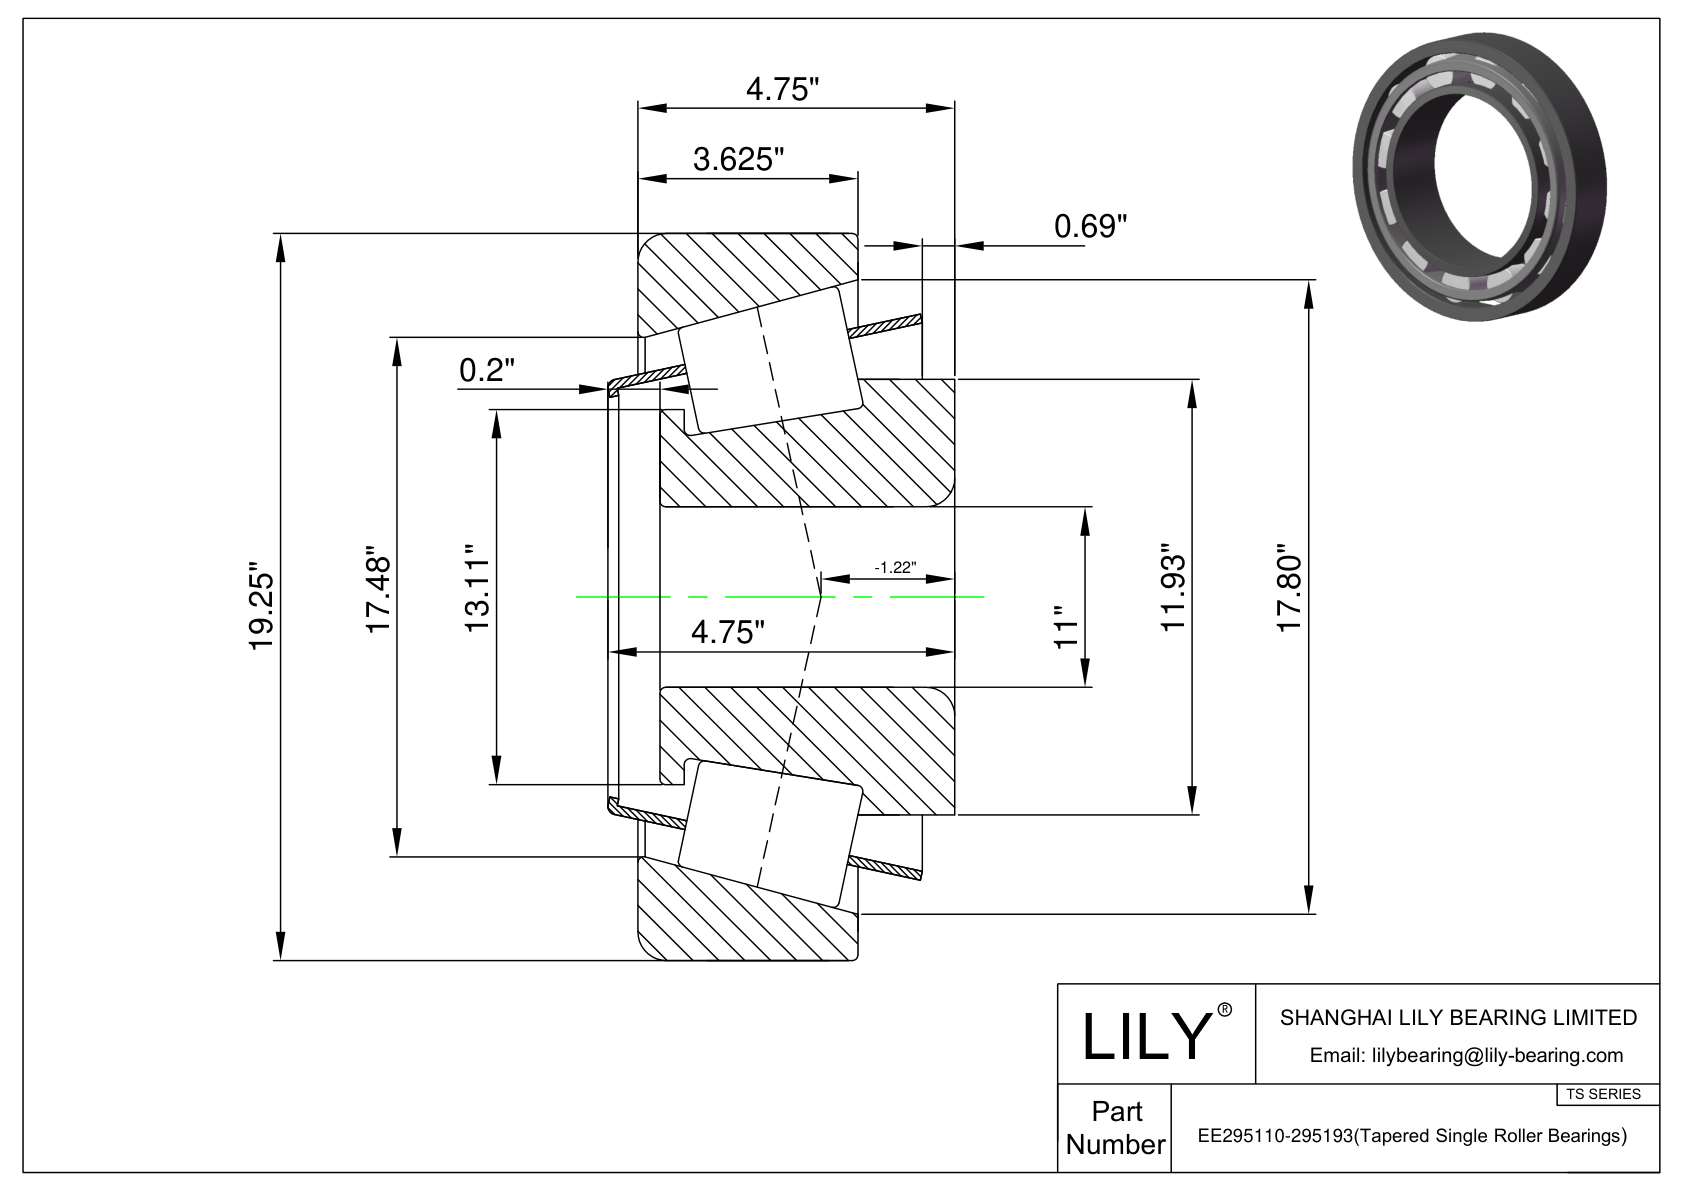 EE295110-295193 TS (Tapered Single Roller Bearings) (Imperial) cad drawing